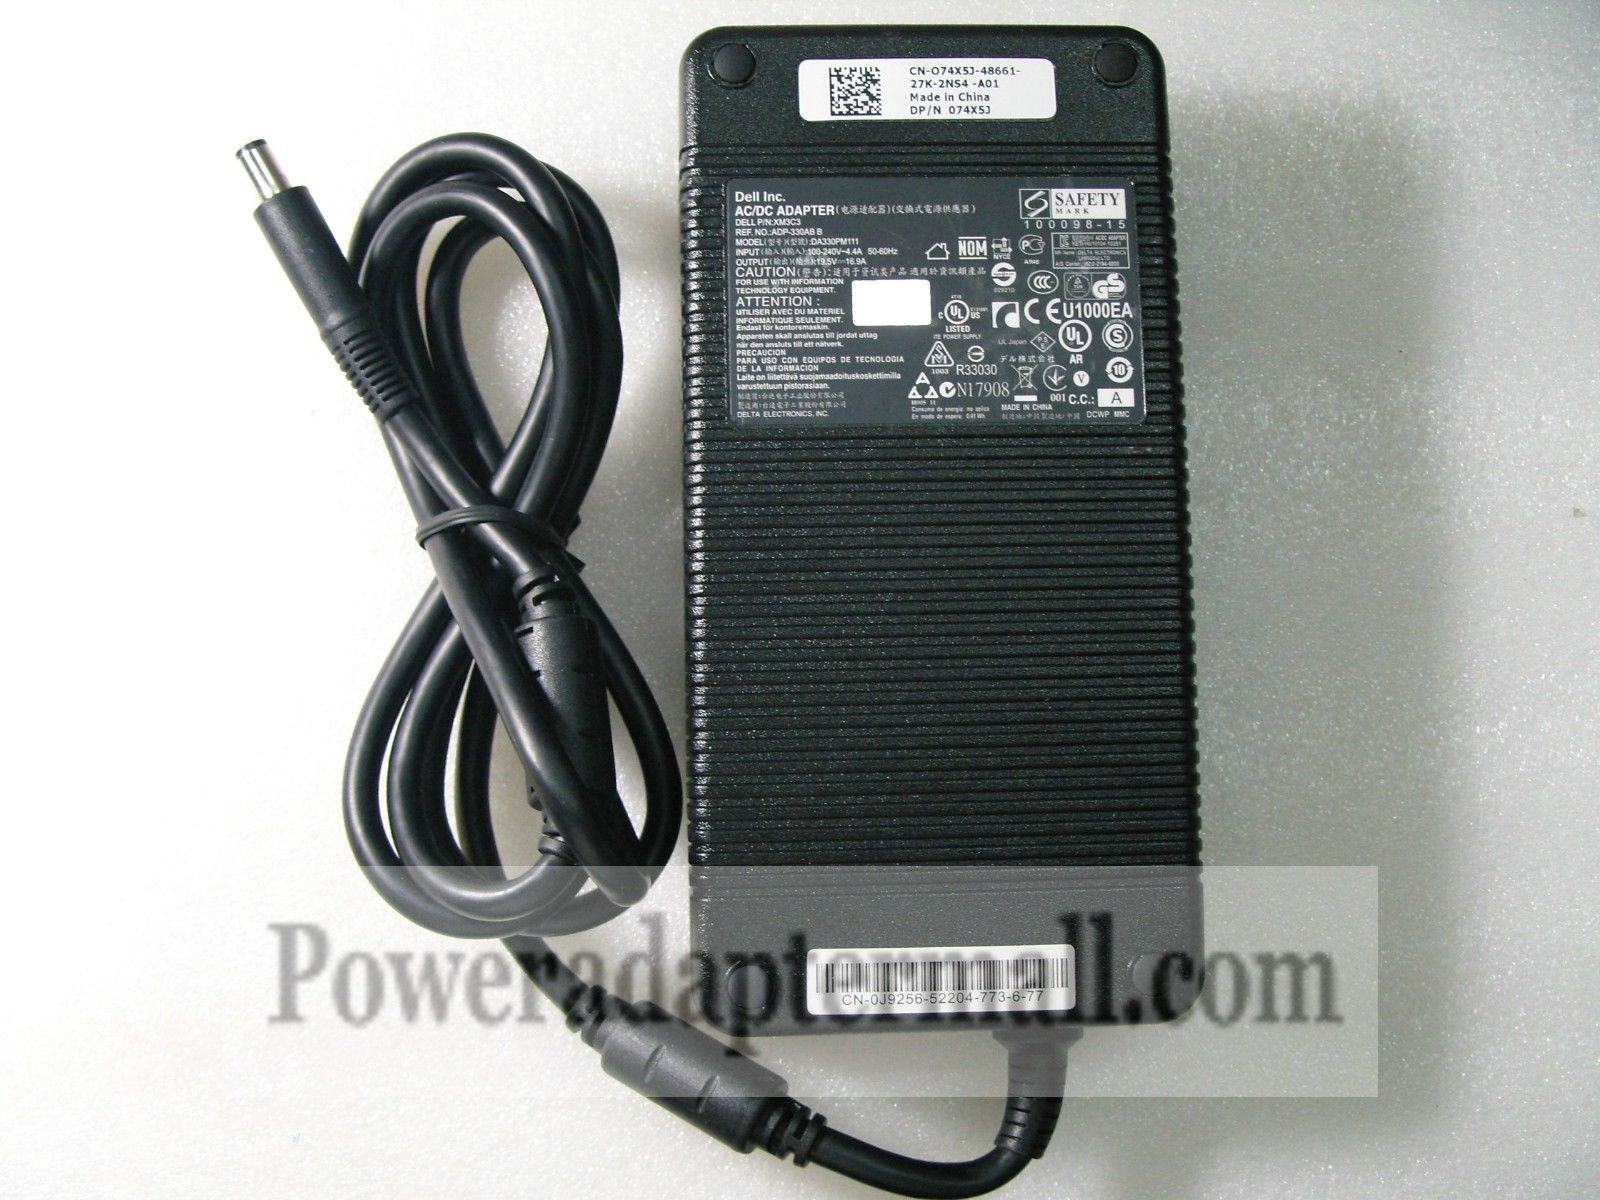 19.5V 16.9A 330W Dell Alienware M18x i7-3940XM Laptop AC Adapter